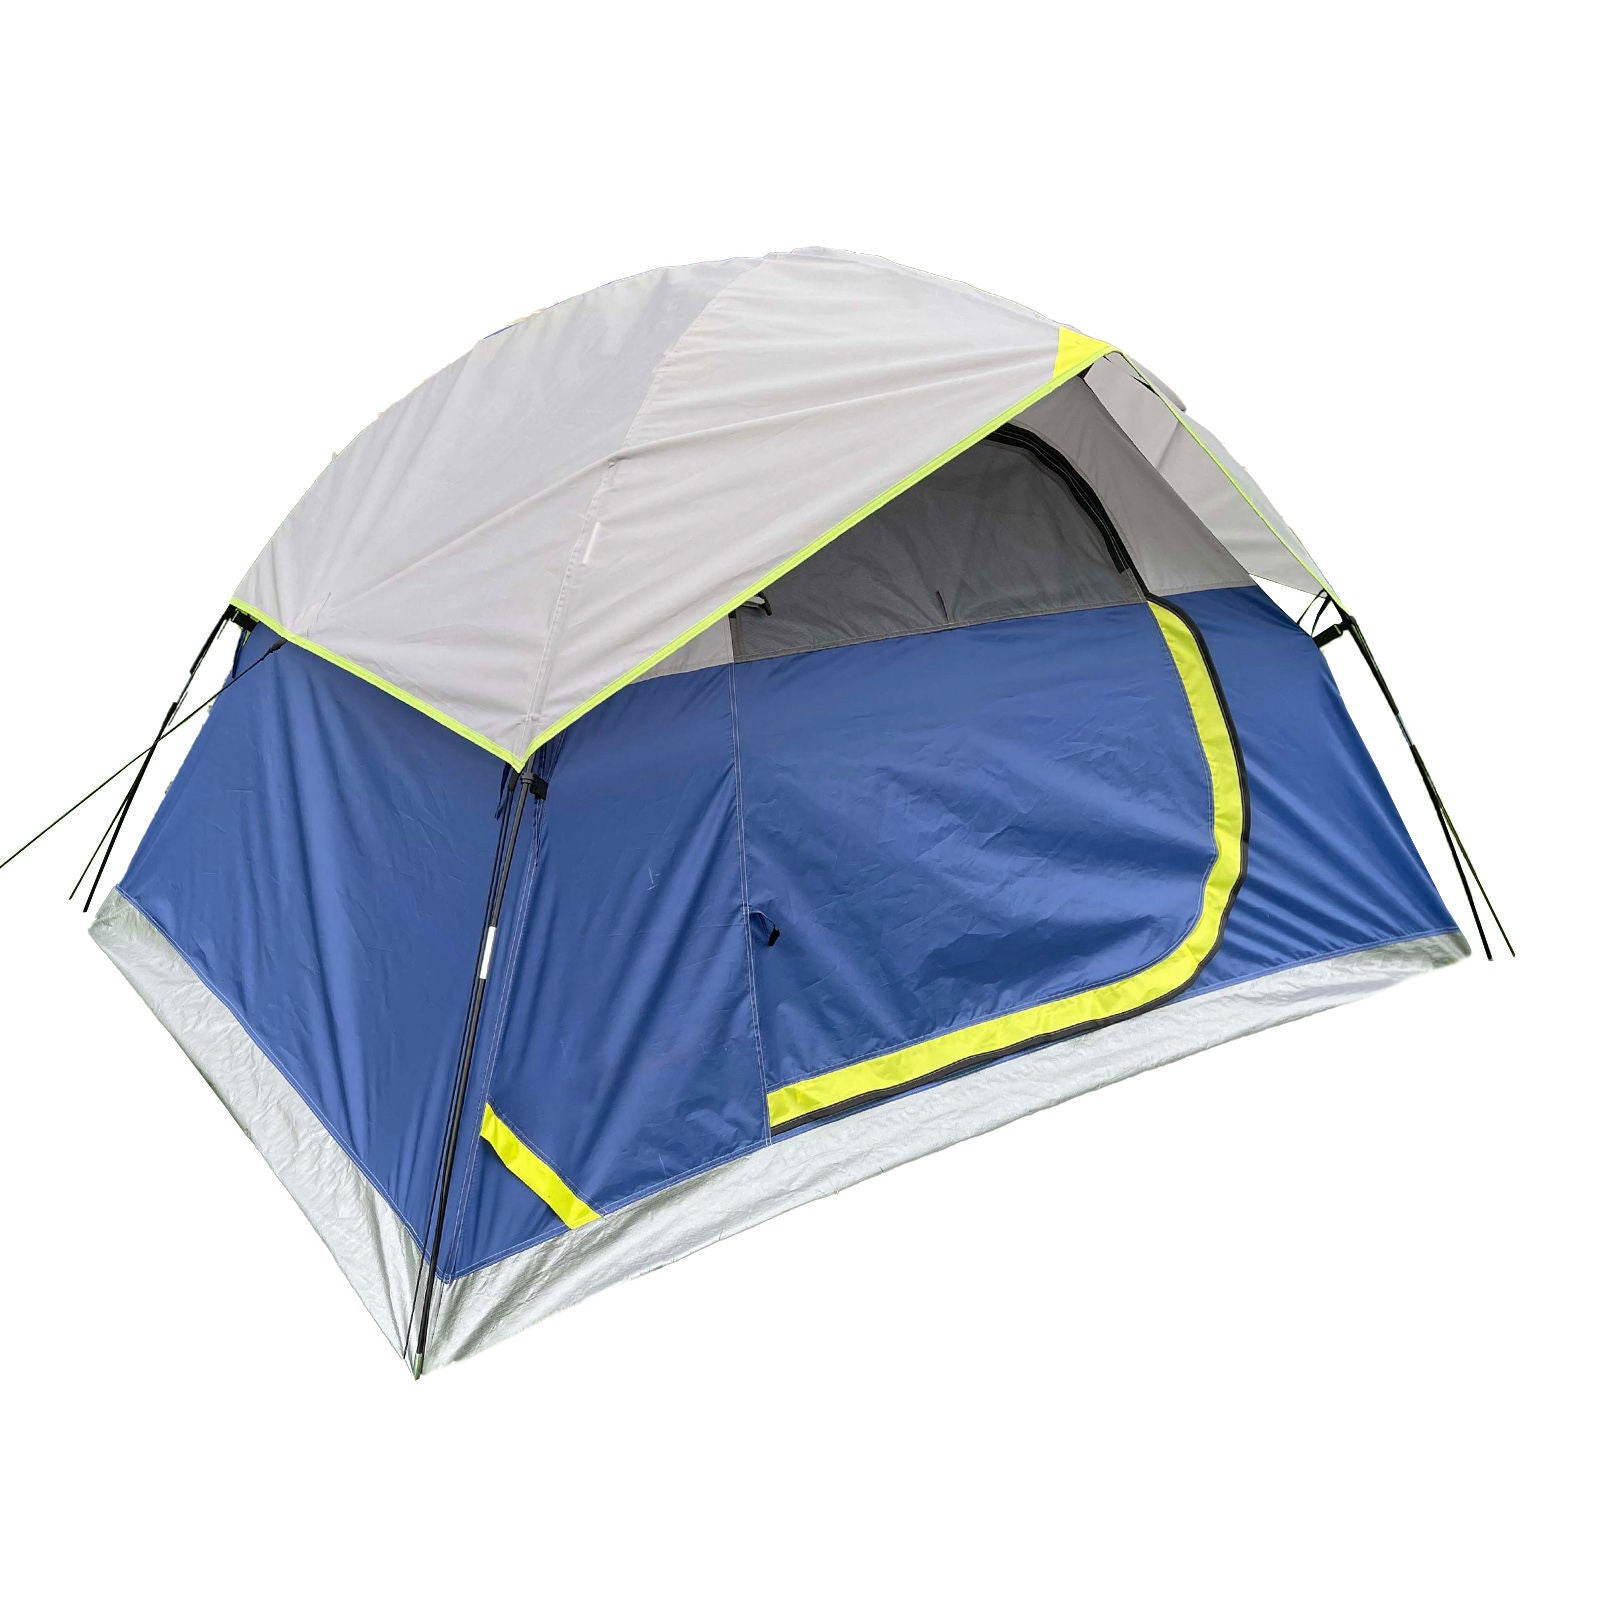 Lightweight 2-3 Person Tent for Hiking, Backpacking, and Camping by Havana Outdoors